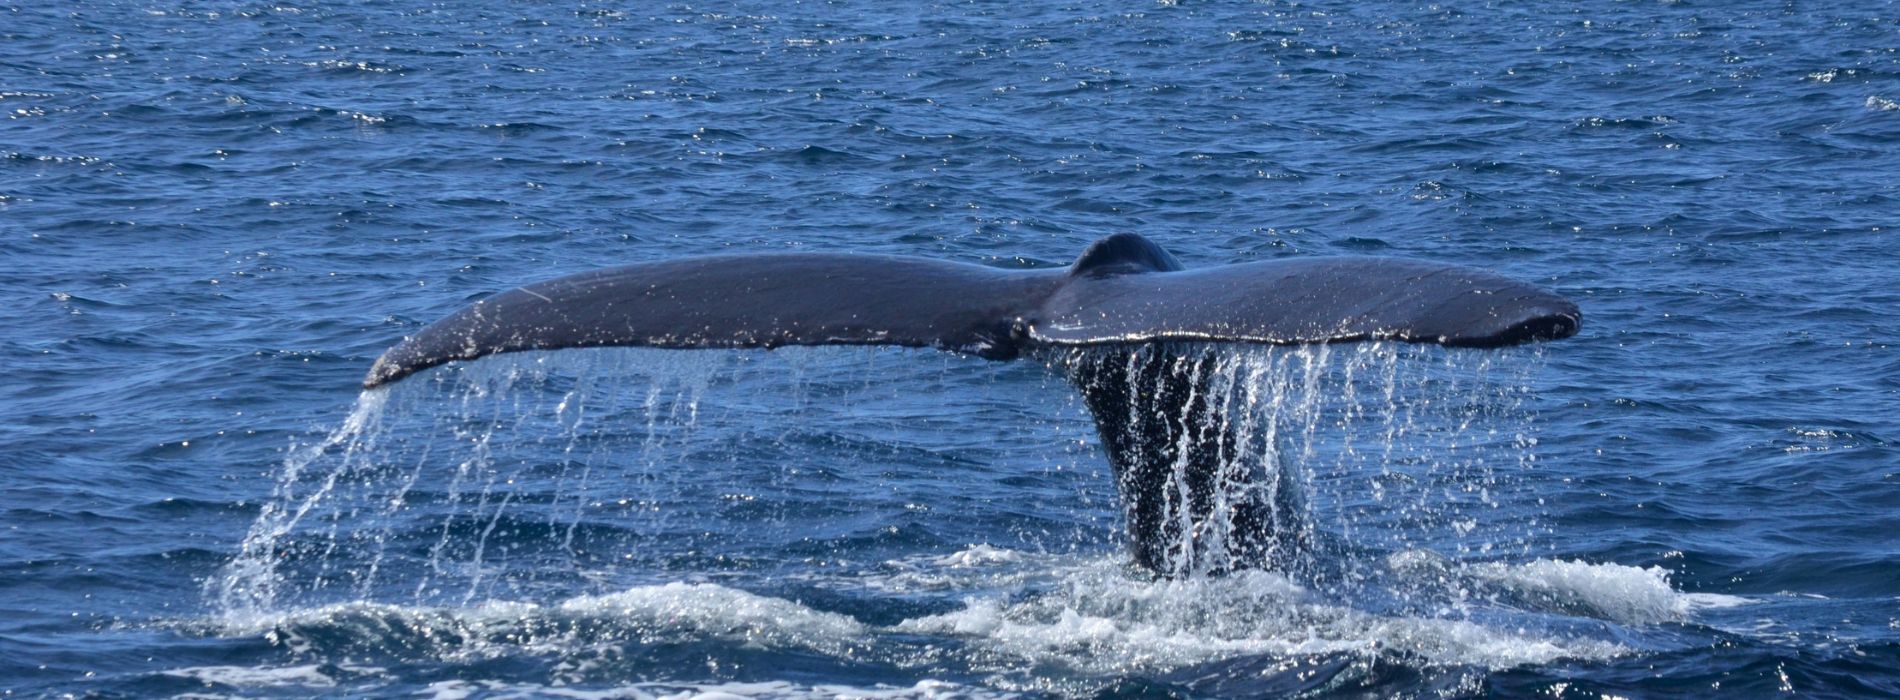 Best Whale Watching Tour in Iceland